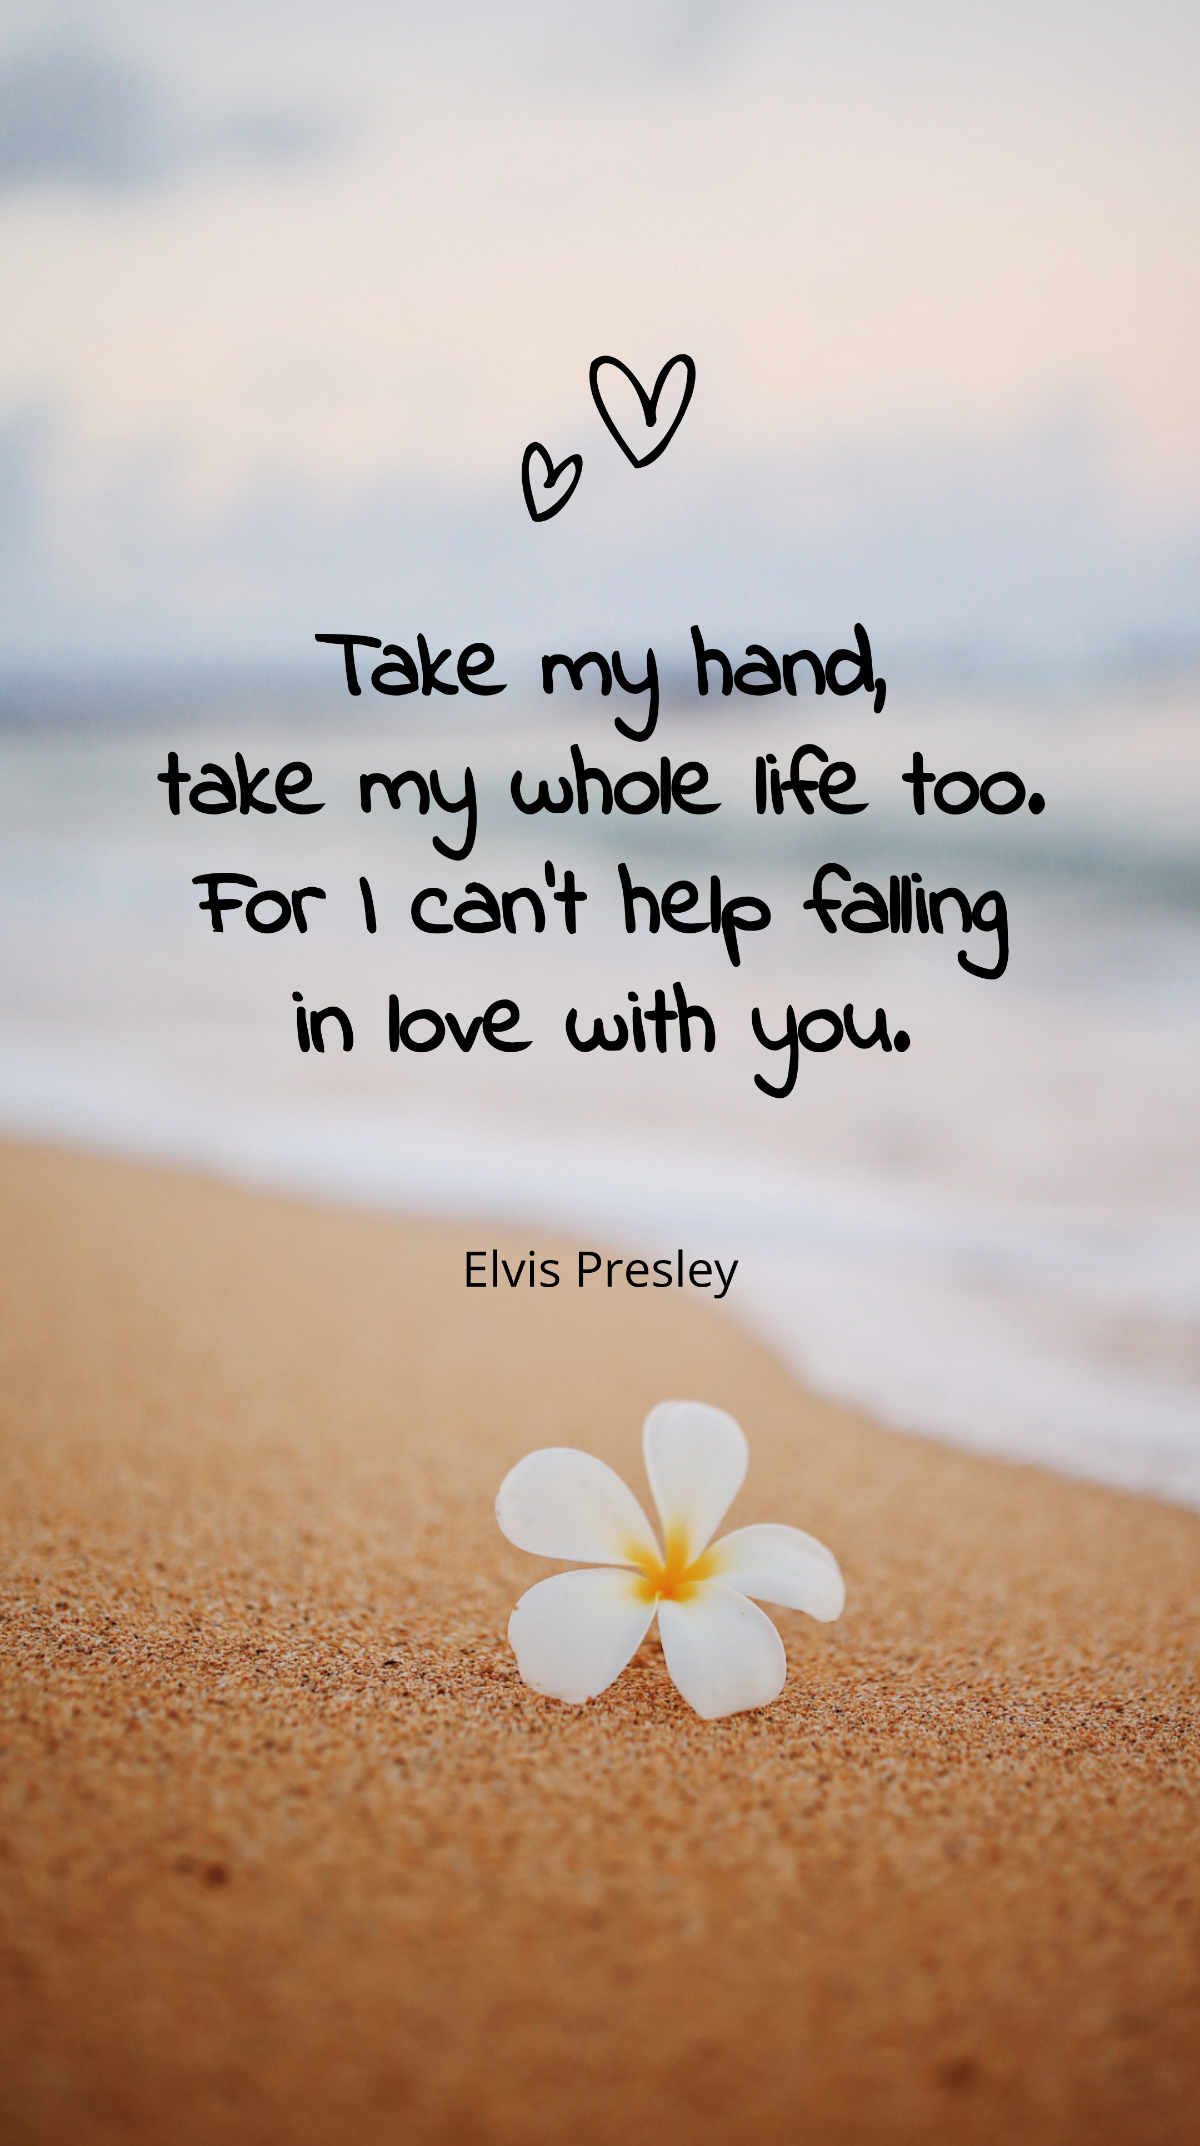 Elvis Presley - “Take my hand, take my whole life too. For I can’t help falling in love with you.”